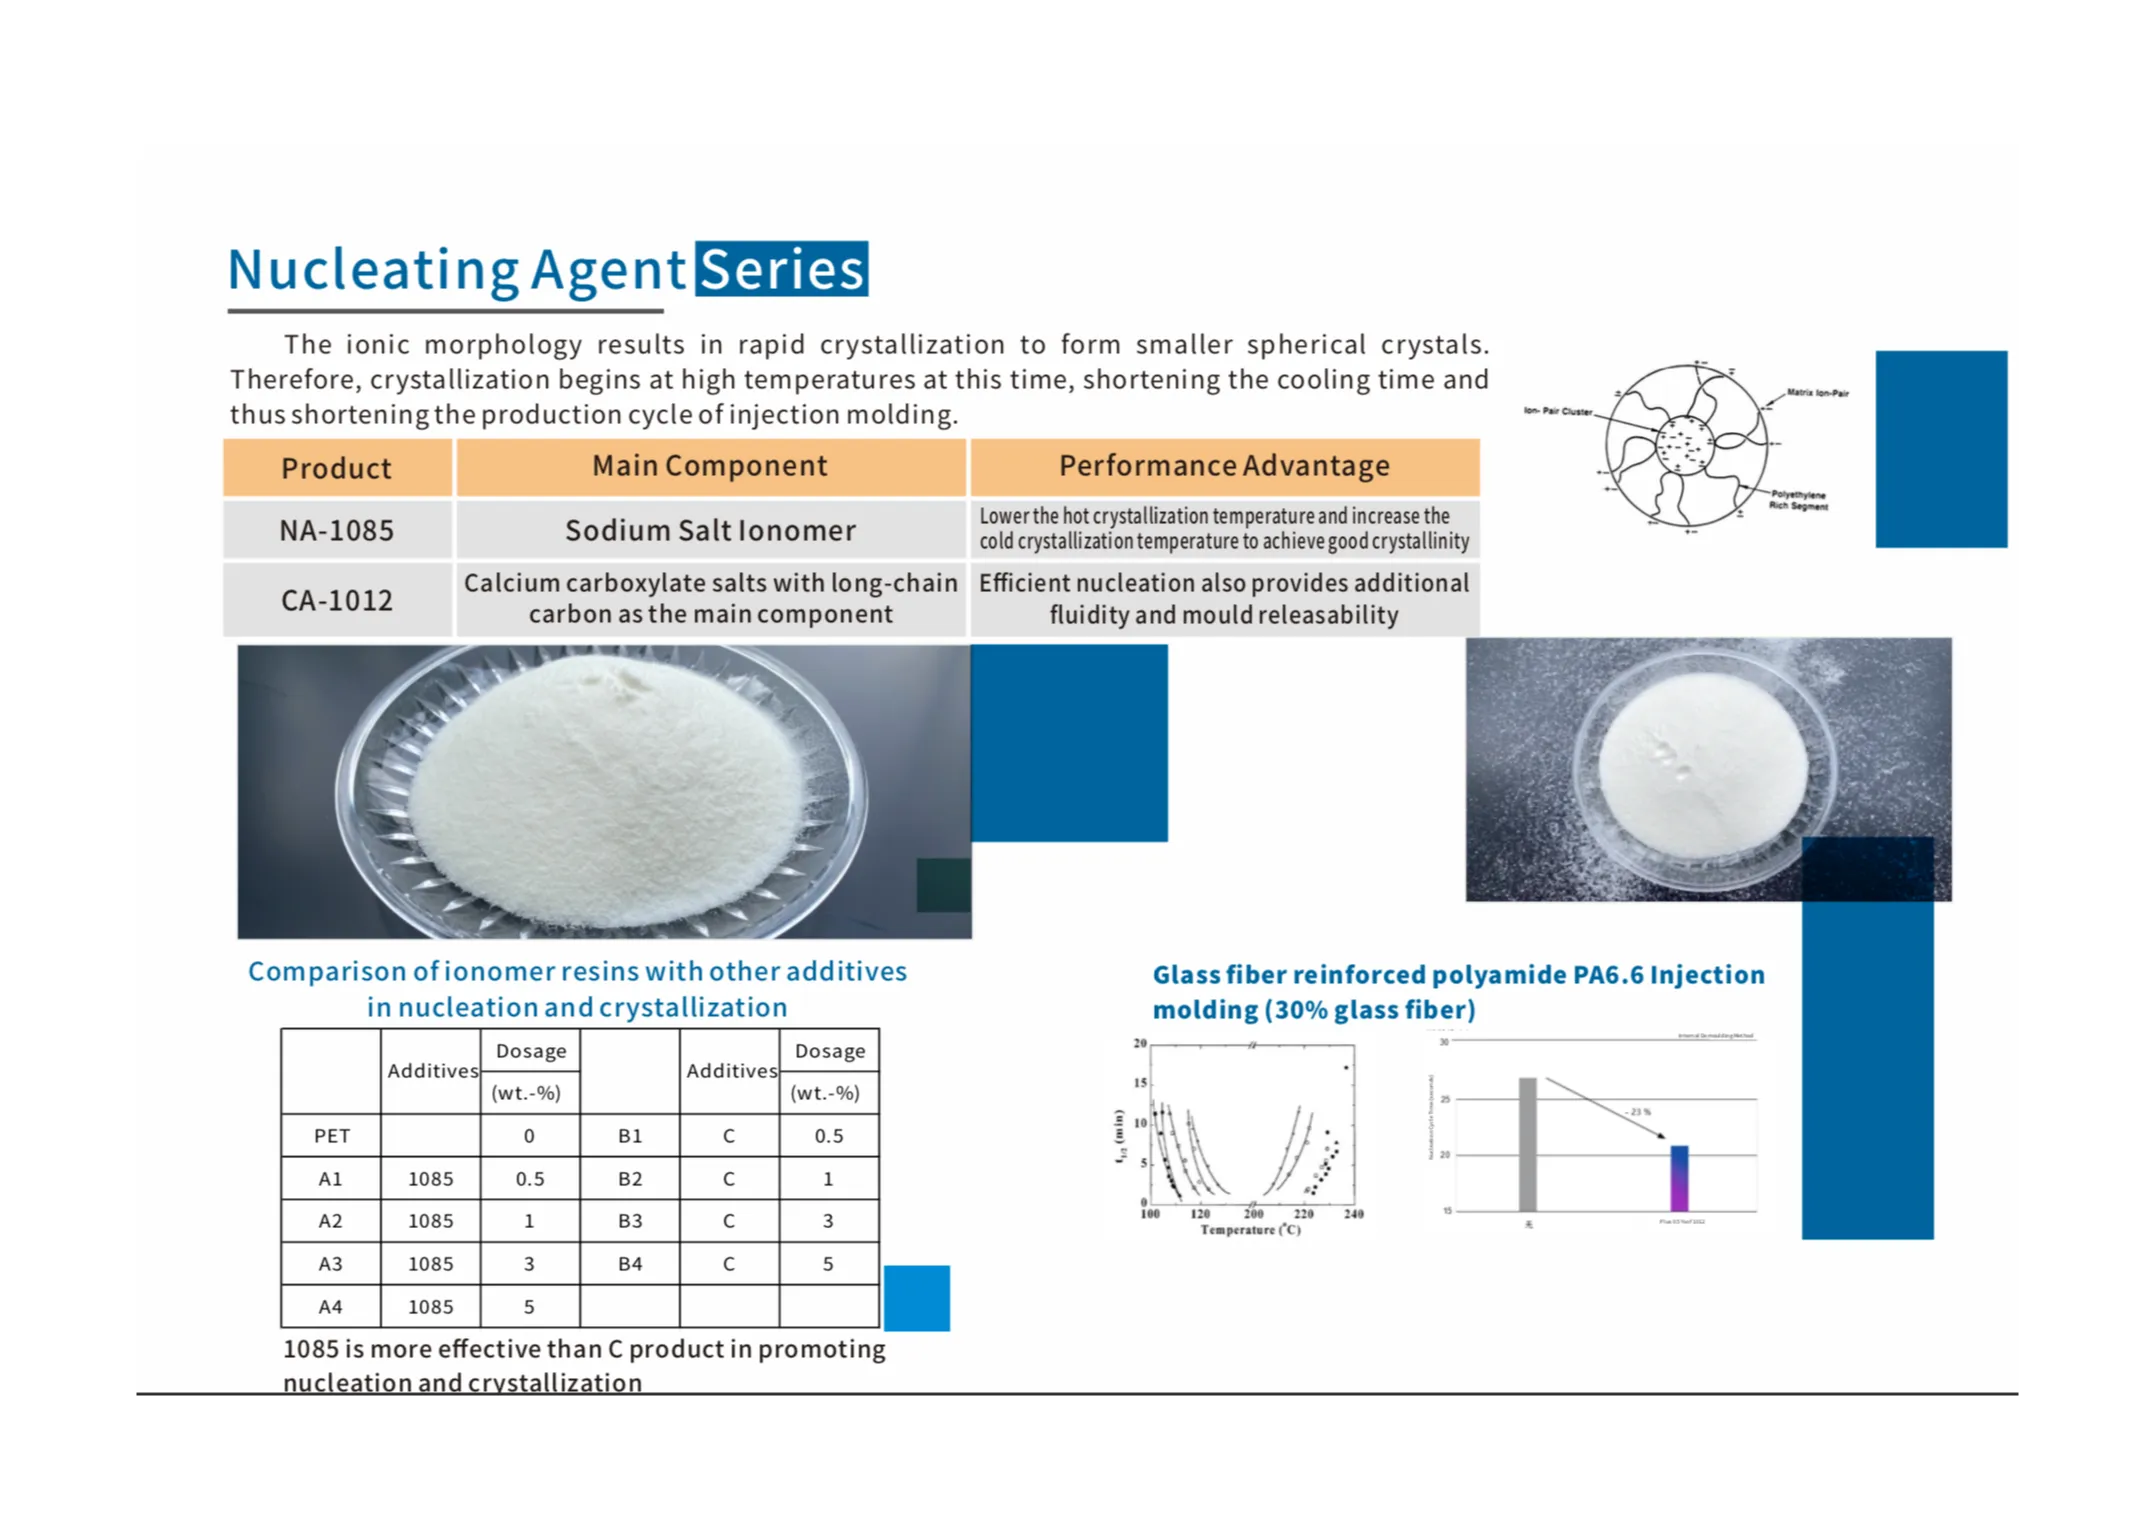 Nucleating Agents SliderImage